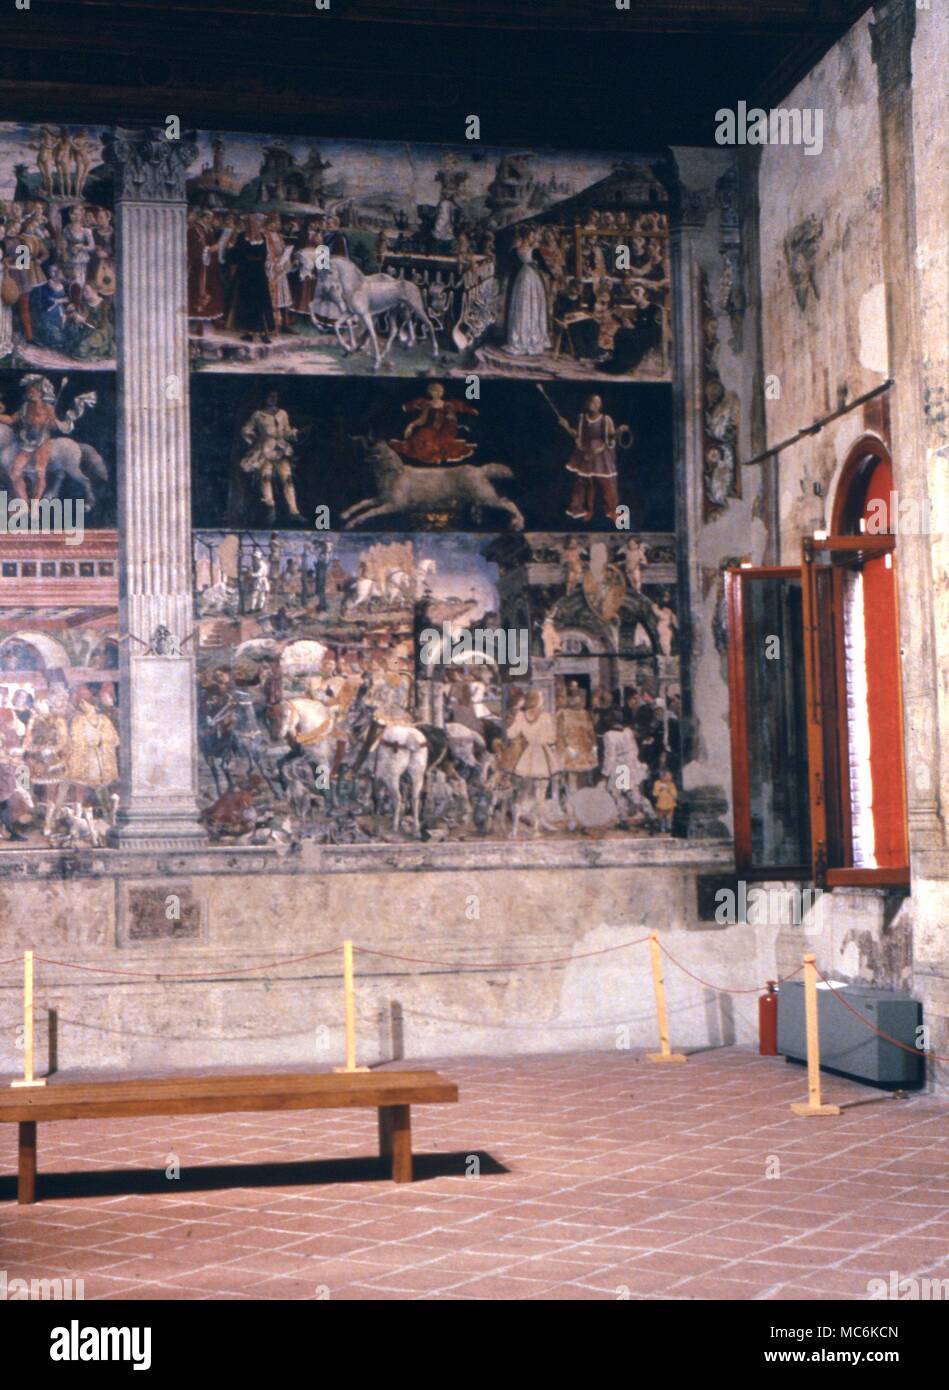 Italian Astrology Ferrara Gneral view of the zodiacal images from decanates series in the Schiffanoi Palace Ferrara Stock Photo